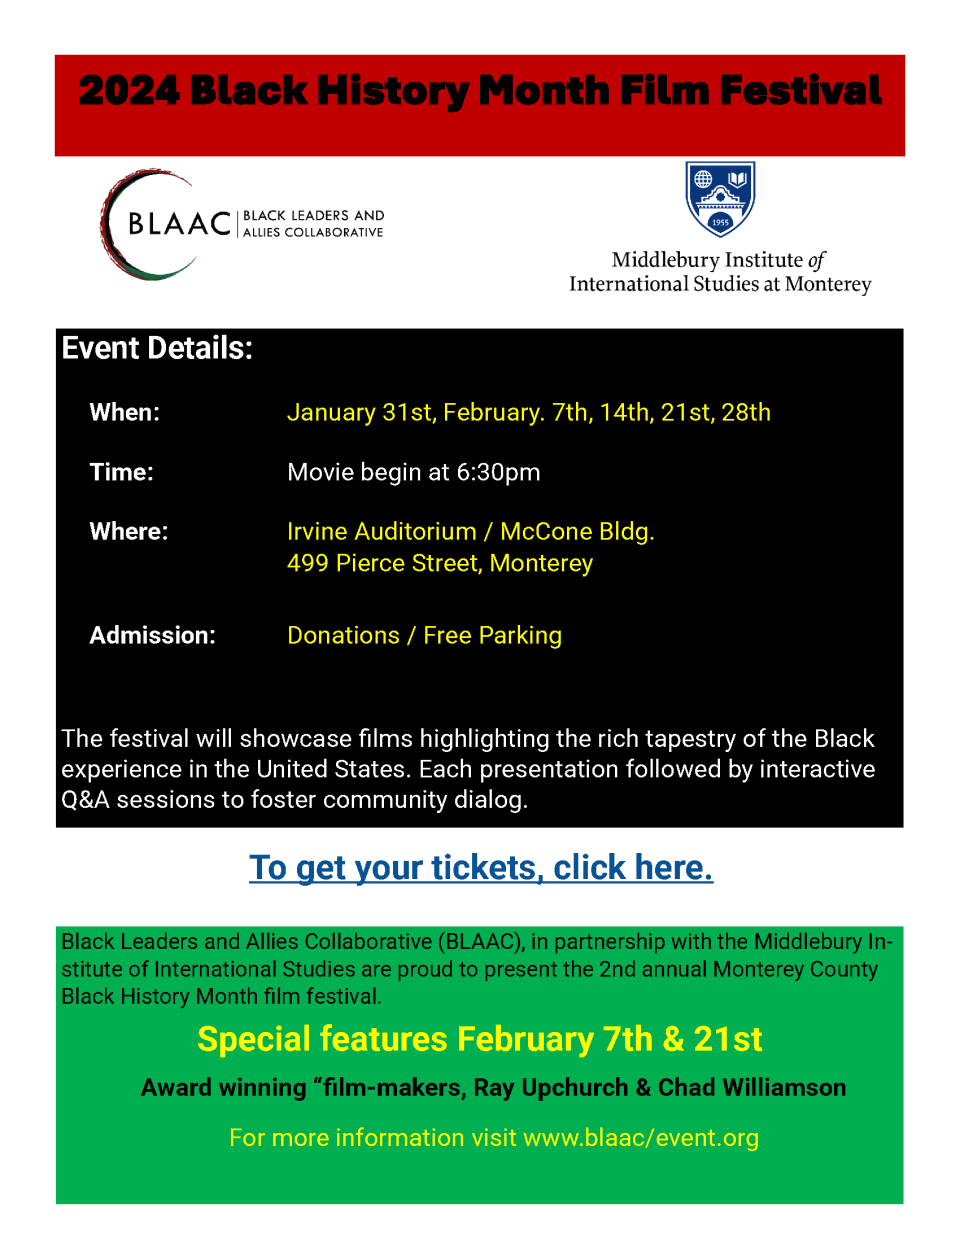 Red, White, Black, and Green 2024 Black History Month Film Festival Flyer.